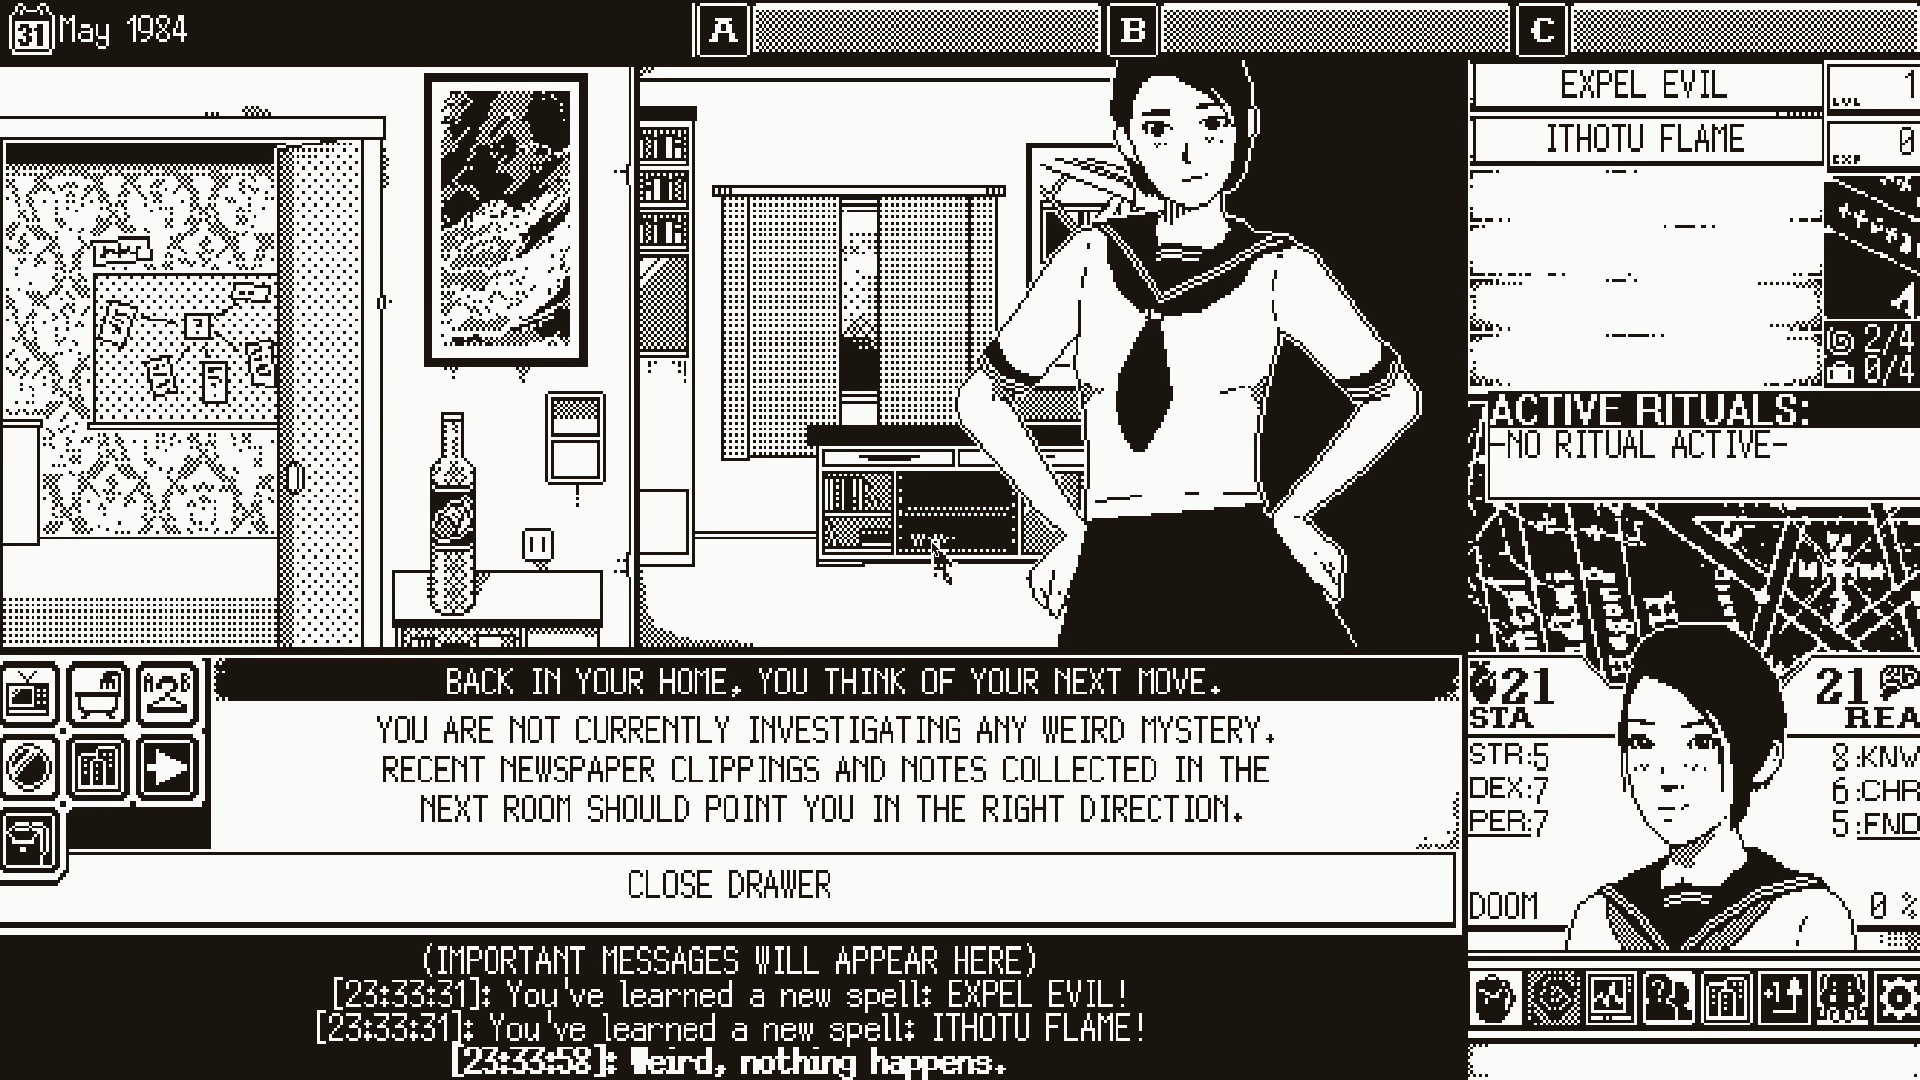 World of Horror Review: Haunted by Bad Interfaces - The Punished Backlog